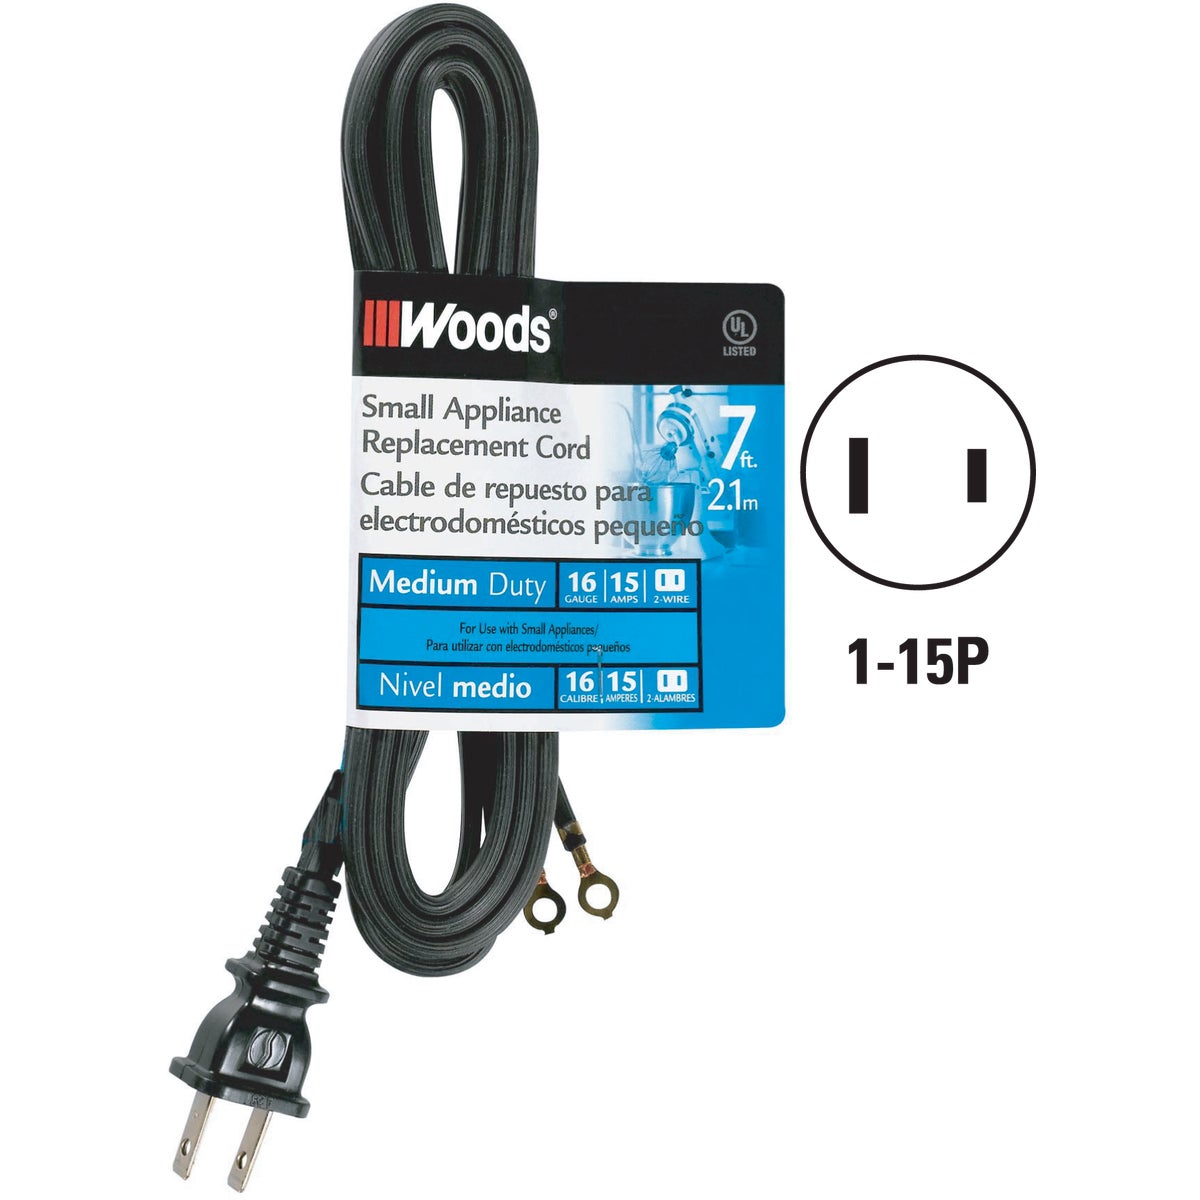 Item 549312, Replacement cord for non-polarized irons and appliances.